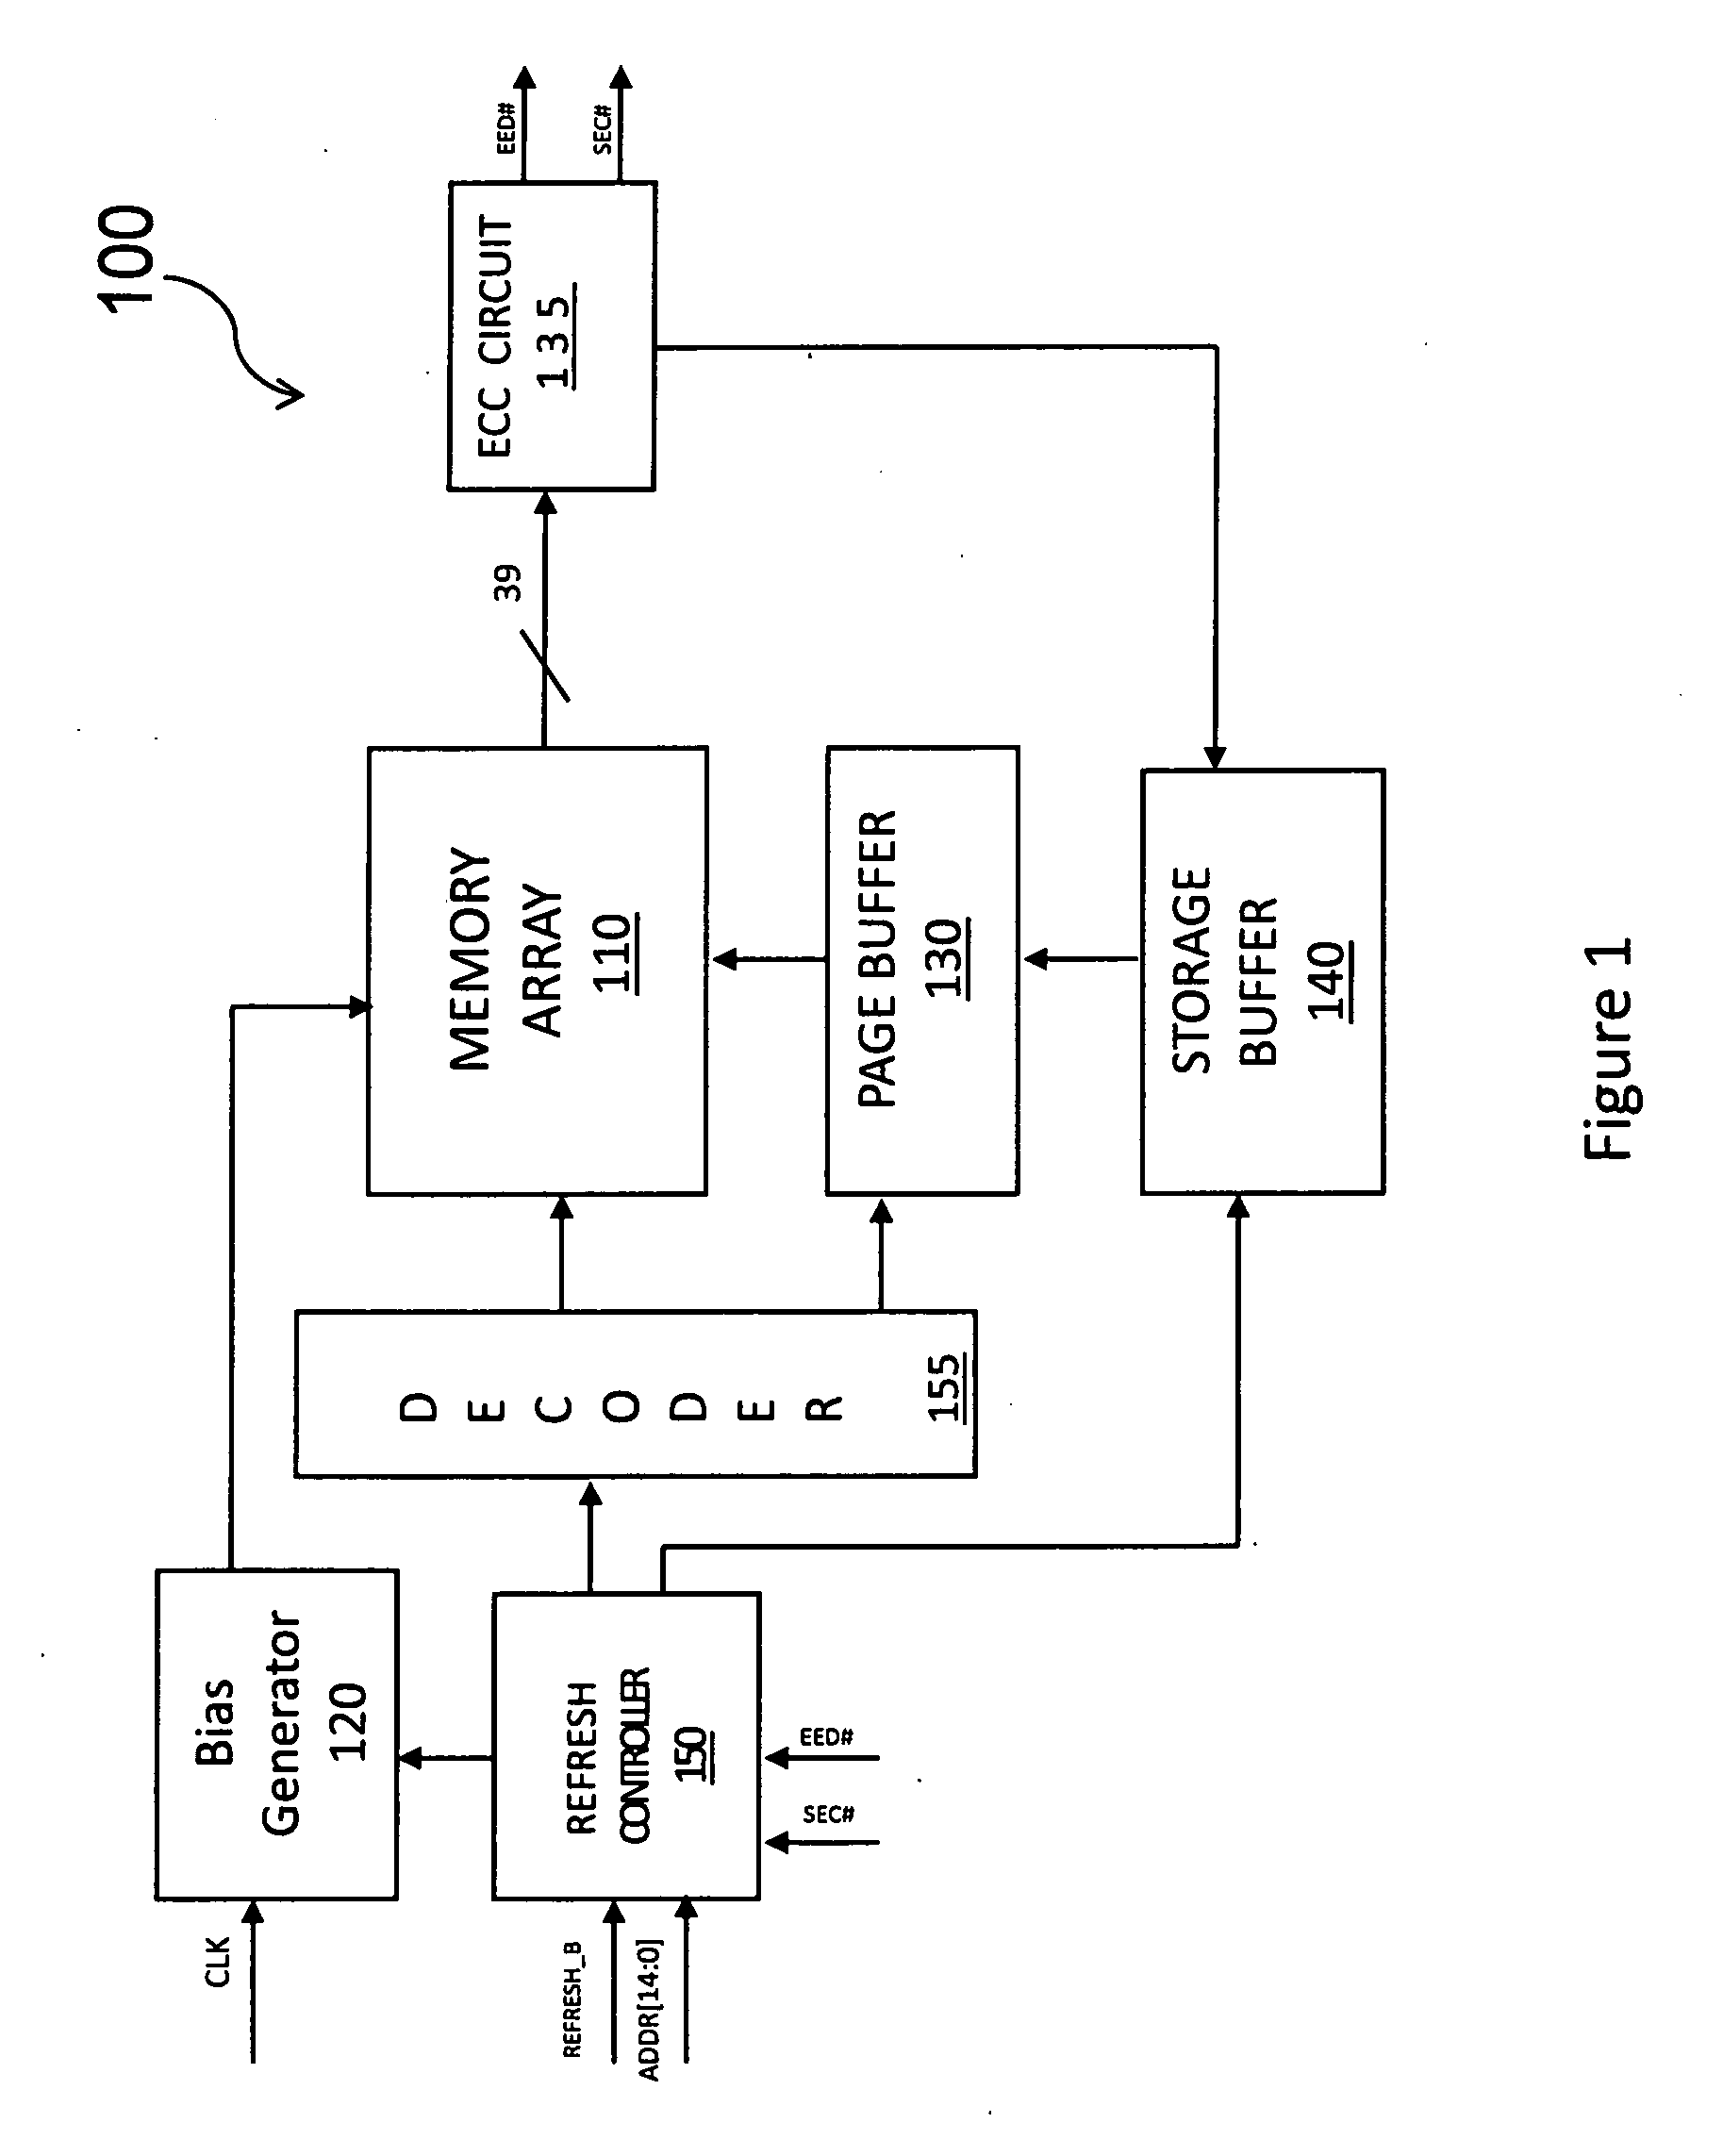 Automatic refresh for improving data retention and endurance characteristics of an embedded non-volatile memory in a standard CMOS logic process